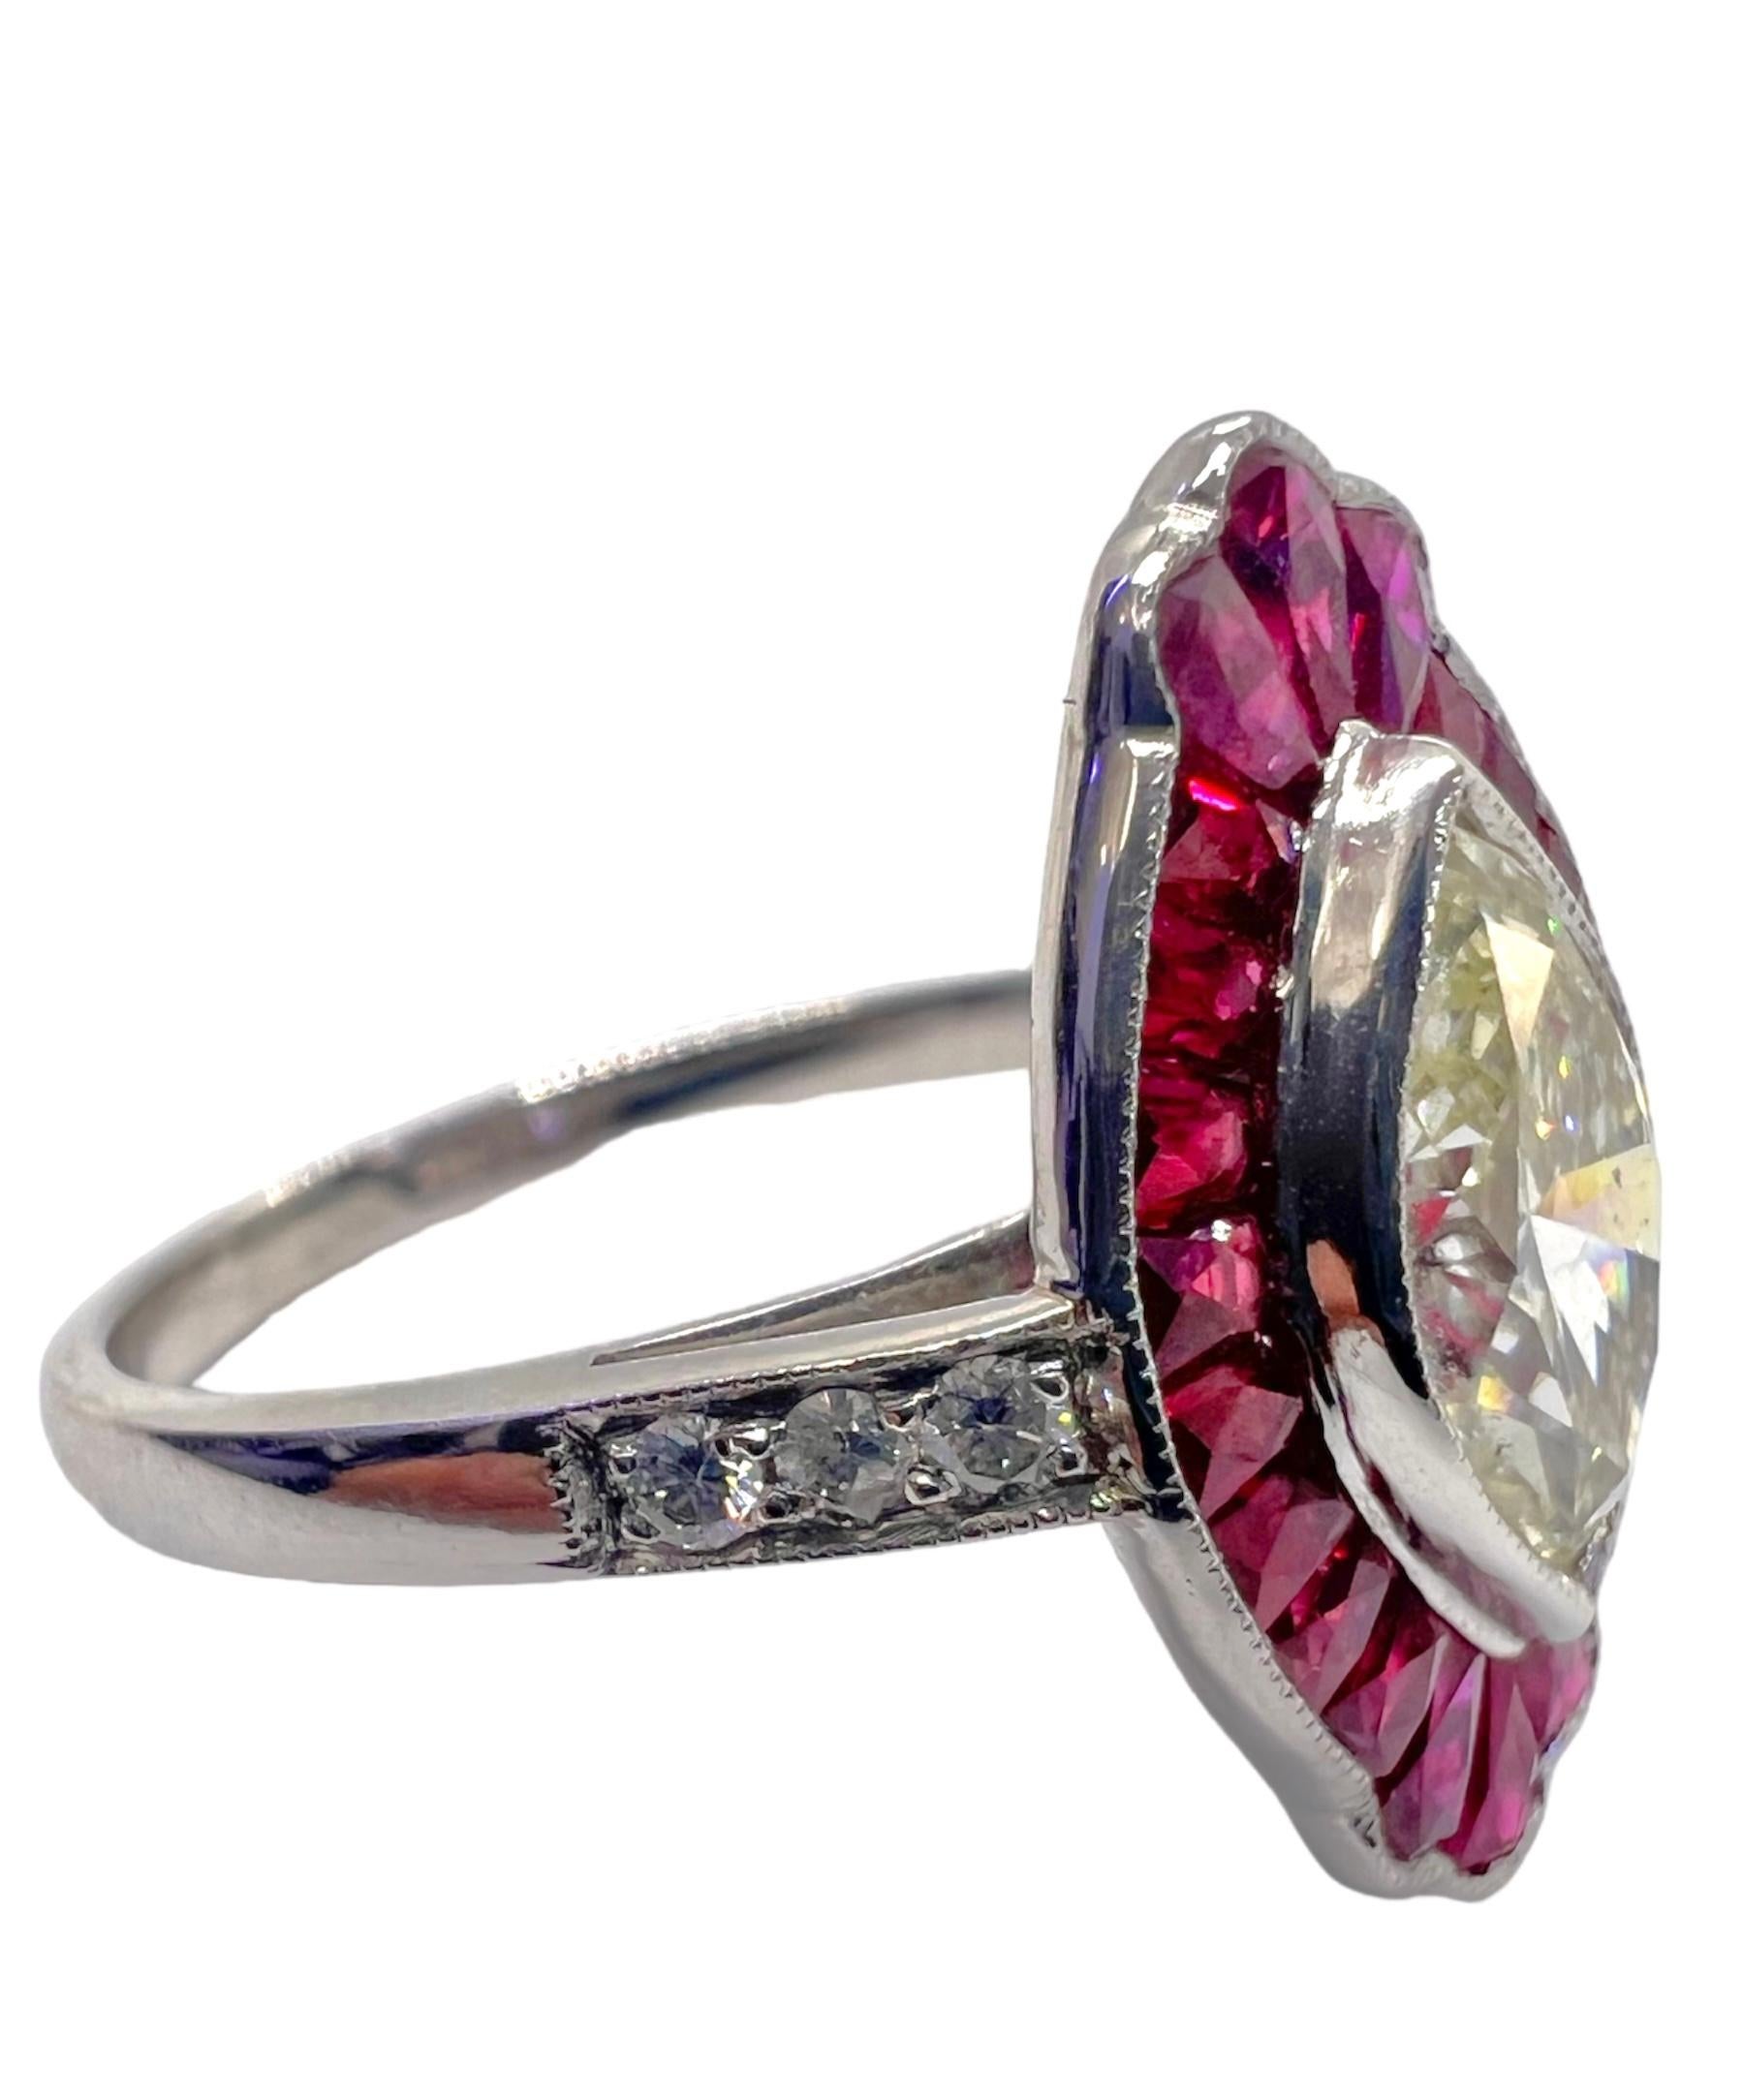 Platinum ring with 1.00 carat marquise cut center diamond 0.18 carat small round diamonds and 2.07 carat of rubies.

Sophia D by Joseph Dardashti LTD has been known worldwide for 35 years and are inspired by classic Art Deco design that merges with